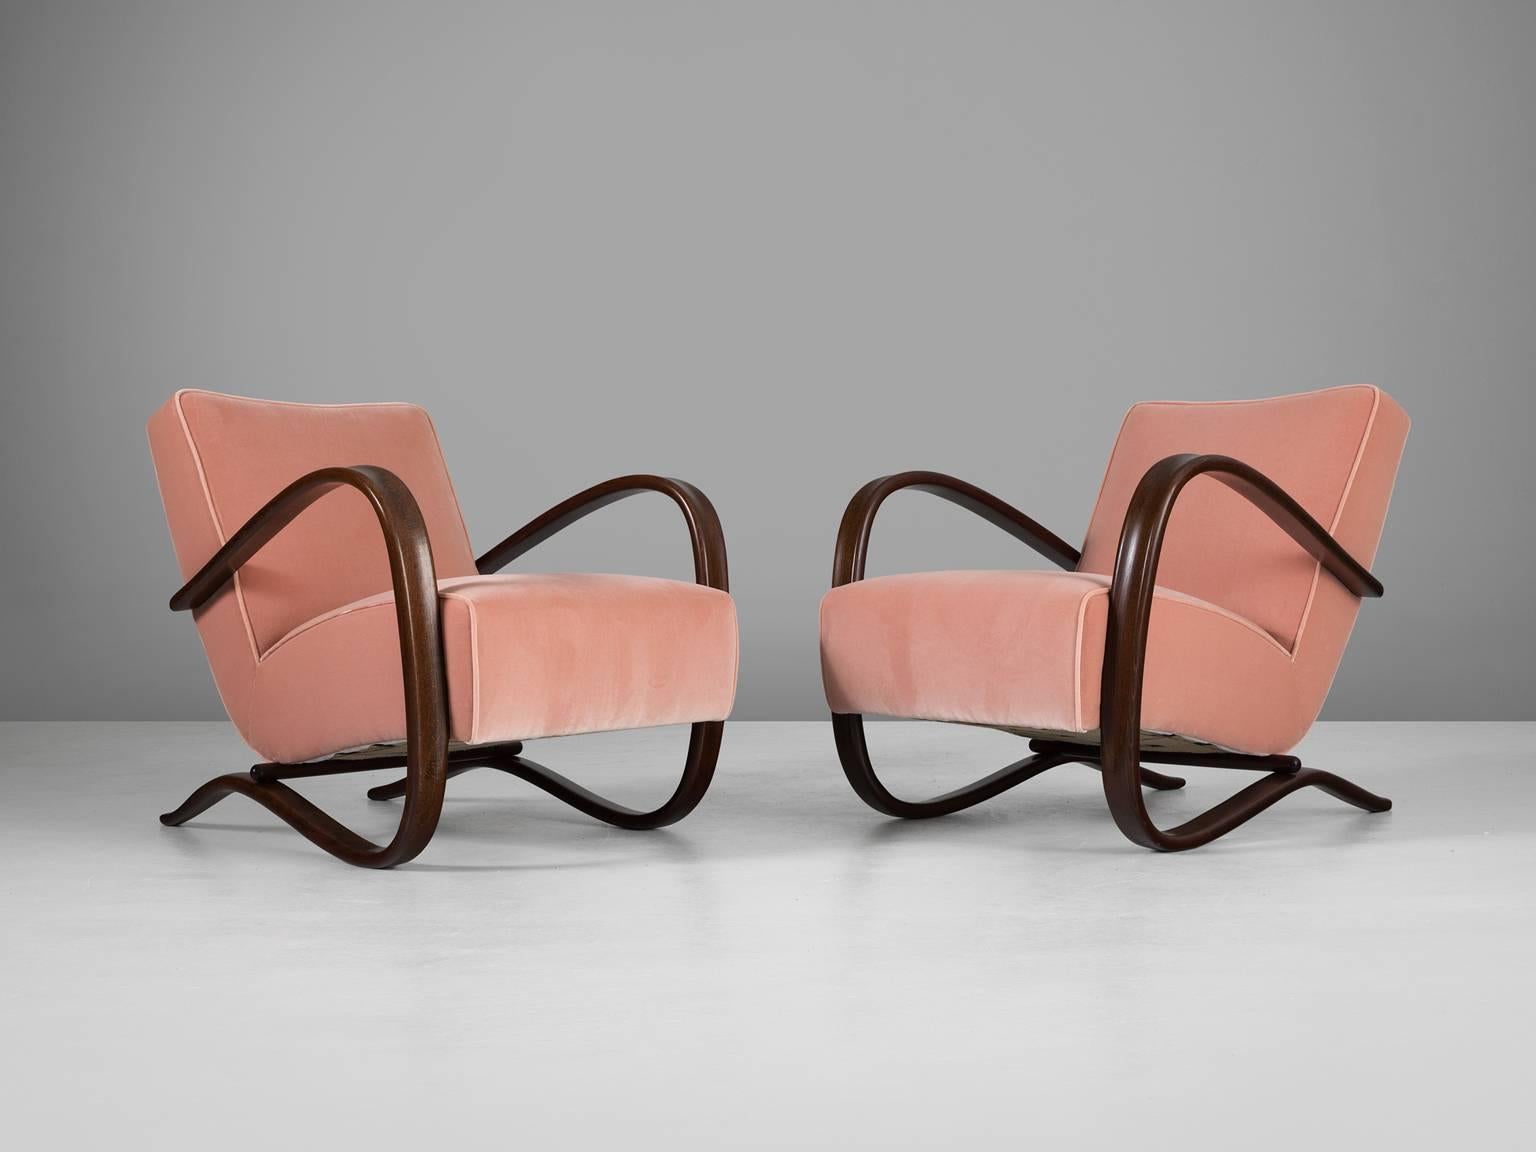 Set of two armchairs, in beech and fabric, by Jindrich Halabala, Czech Republic 1930s.

These chairs have a very dynamic appearance, due the curved base that ends fluently in the armrests. The dark brown stained wood nicely combines to the dark